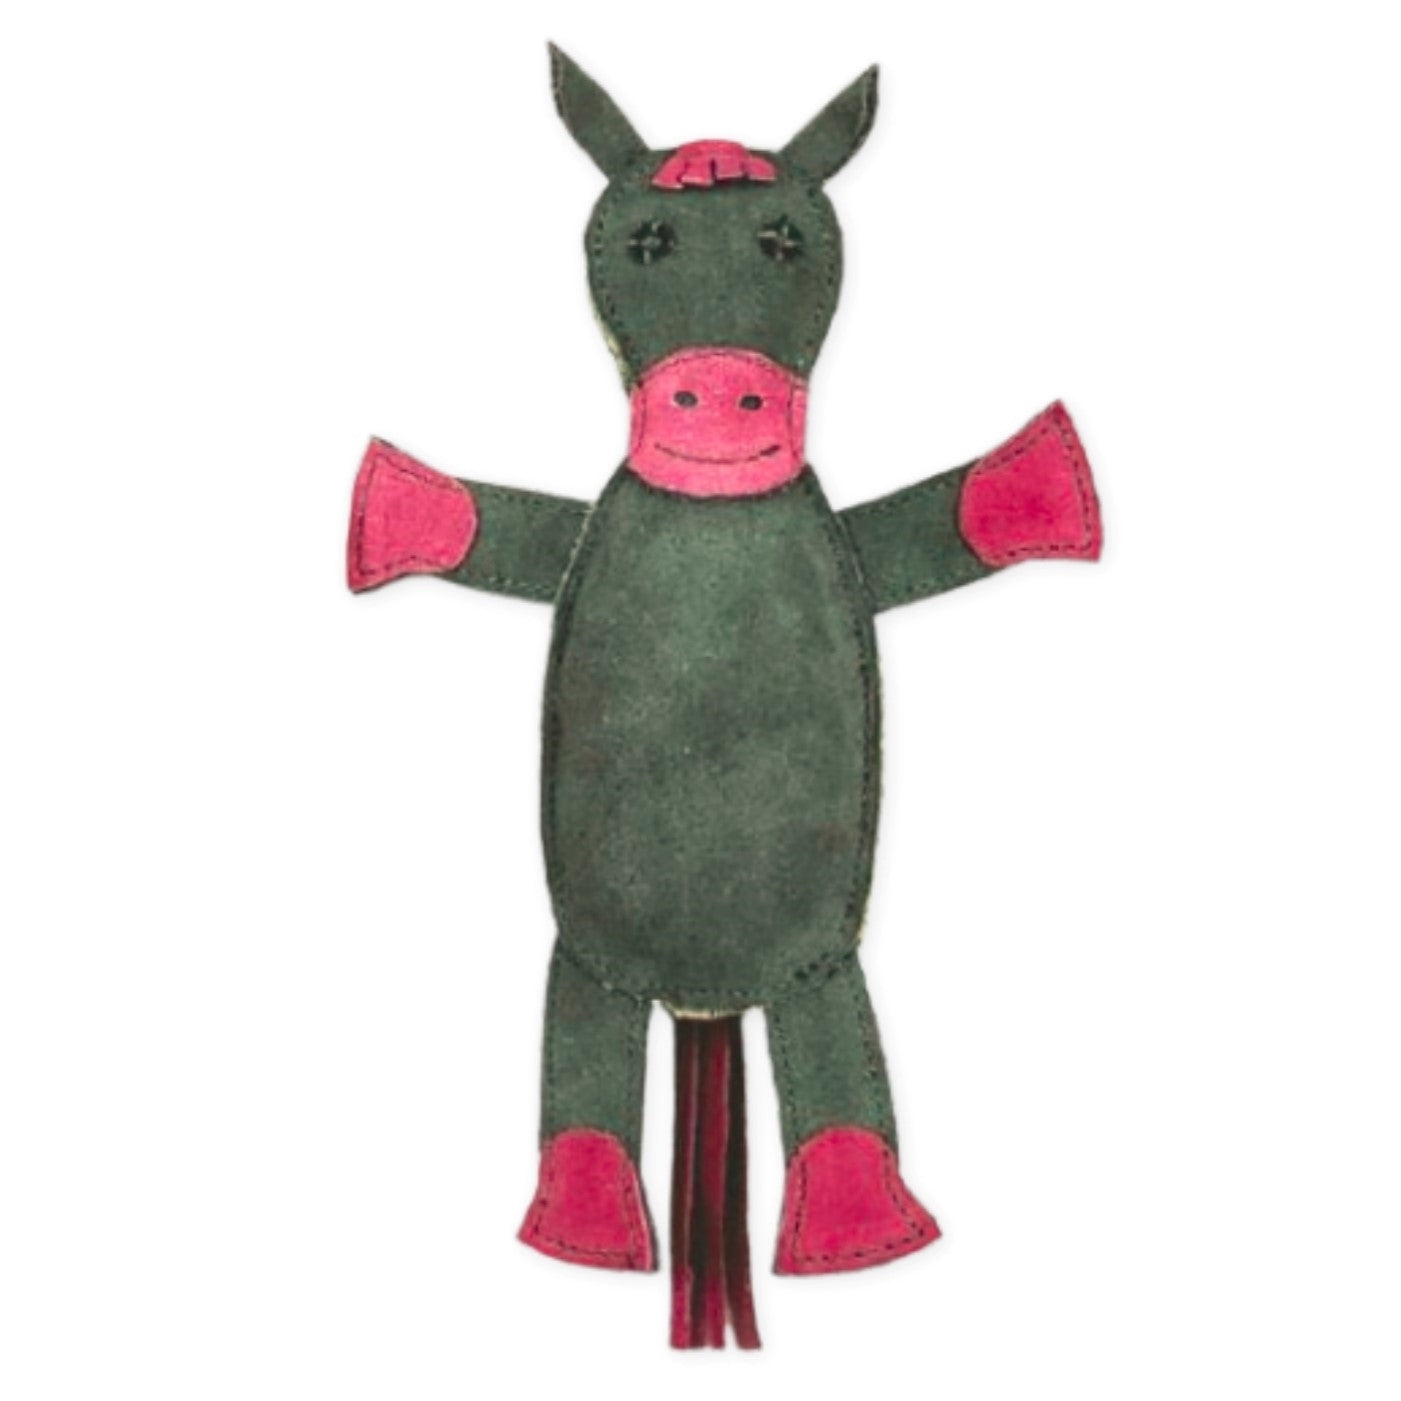 A colorful, child-like drawing of a green pig with pink accents on the ears, snout, and hooves against a white background, suggesting a playful and imaginative interpretation of farm animals. Nearby lies Henry the Horse - chive from Georgie Paws.